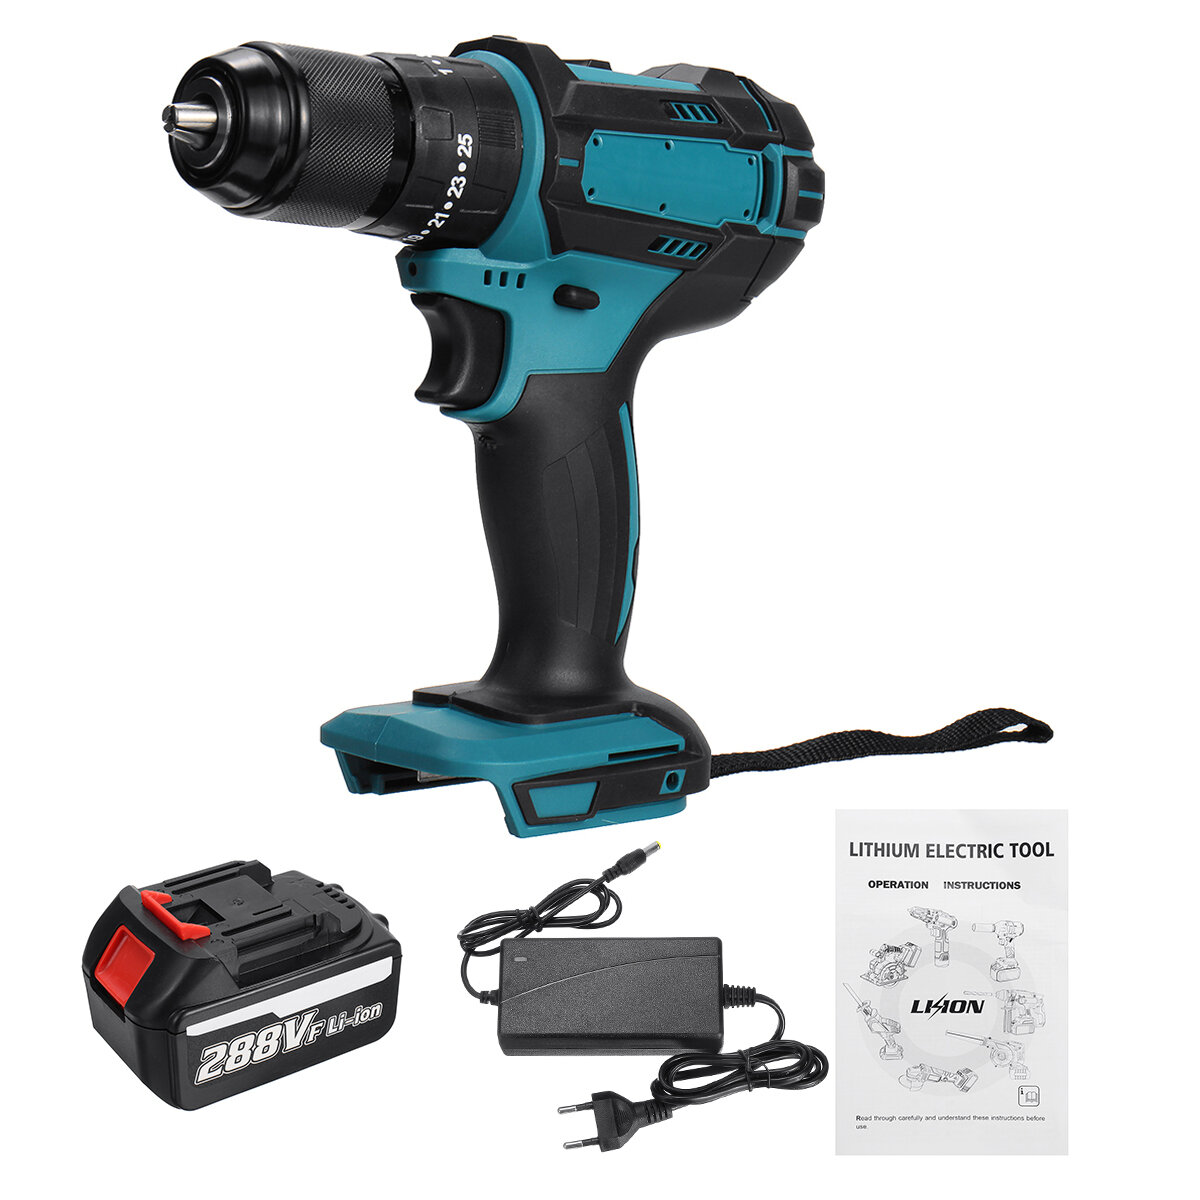 13mm 800W Cordless Brushless Impact Drill Driver 25+3 Torque Electric Drill Screwdriver...